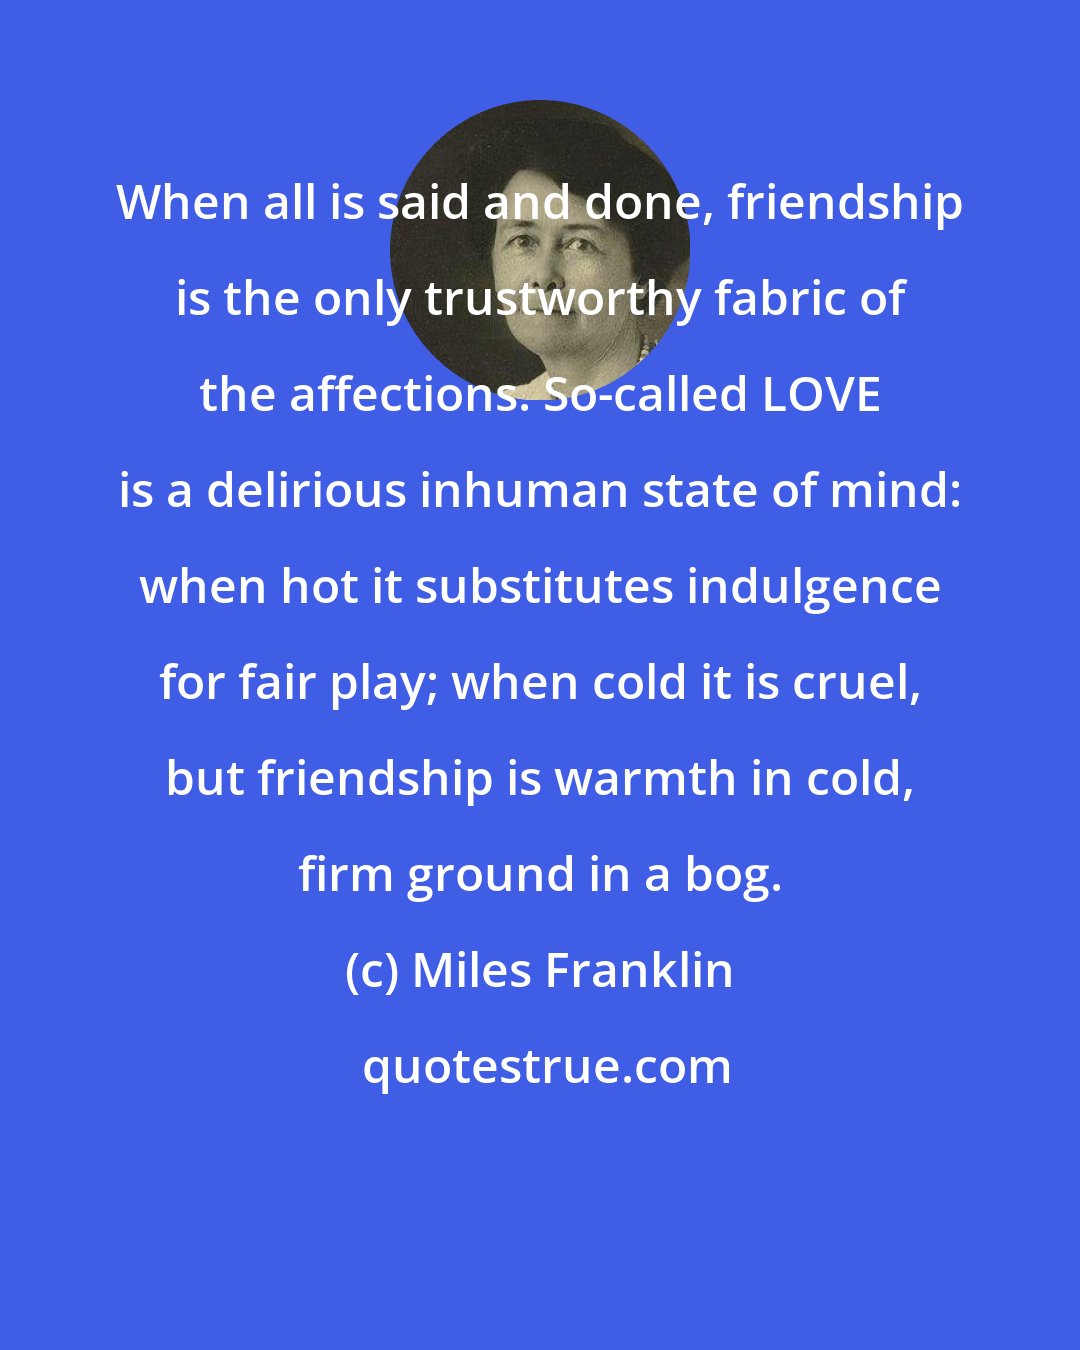 Miles Franklin: When all is said and done, friendship is the only trustworthy fabric of the affections. So-called LOVE is a delirious inhuman state of mind: when hot it substitutes indulgence for fair play; when cold it is cruel, but friendship is warmth in cold, firm ground in a bog.